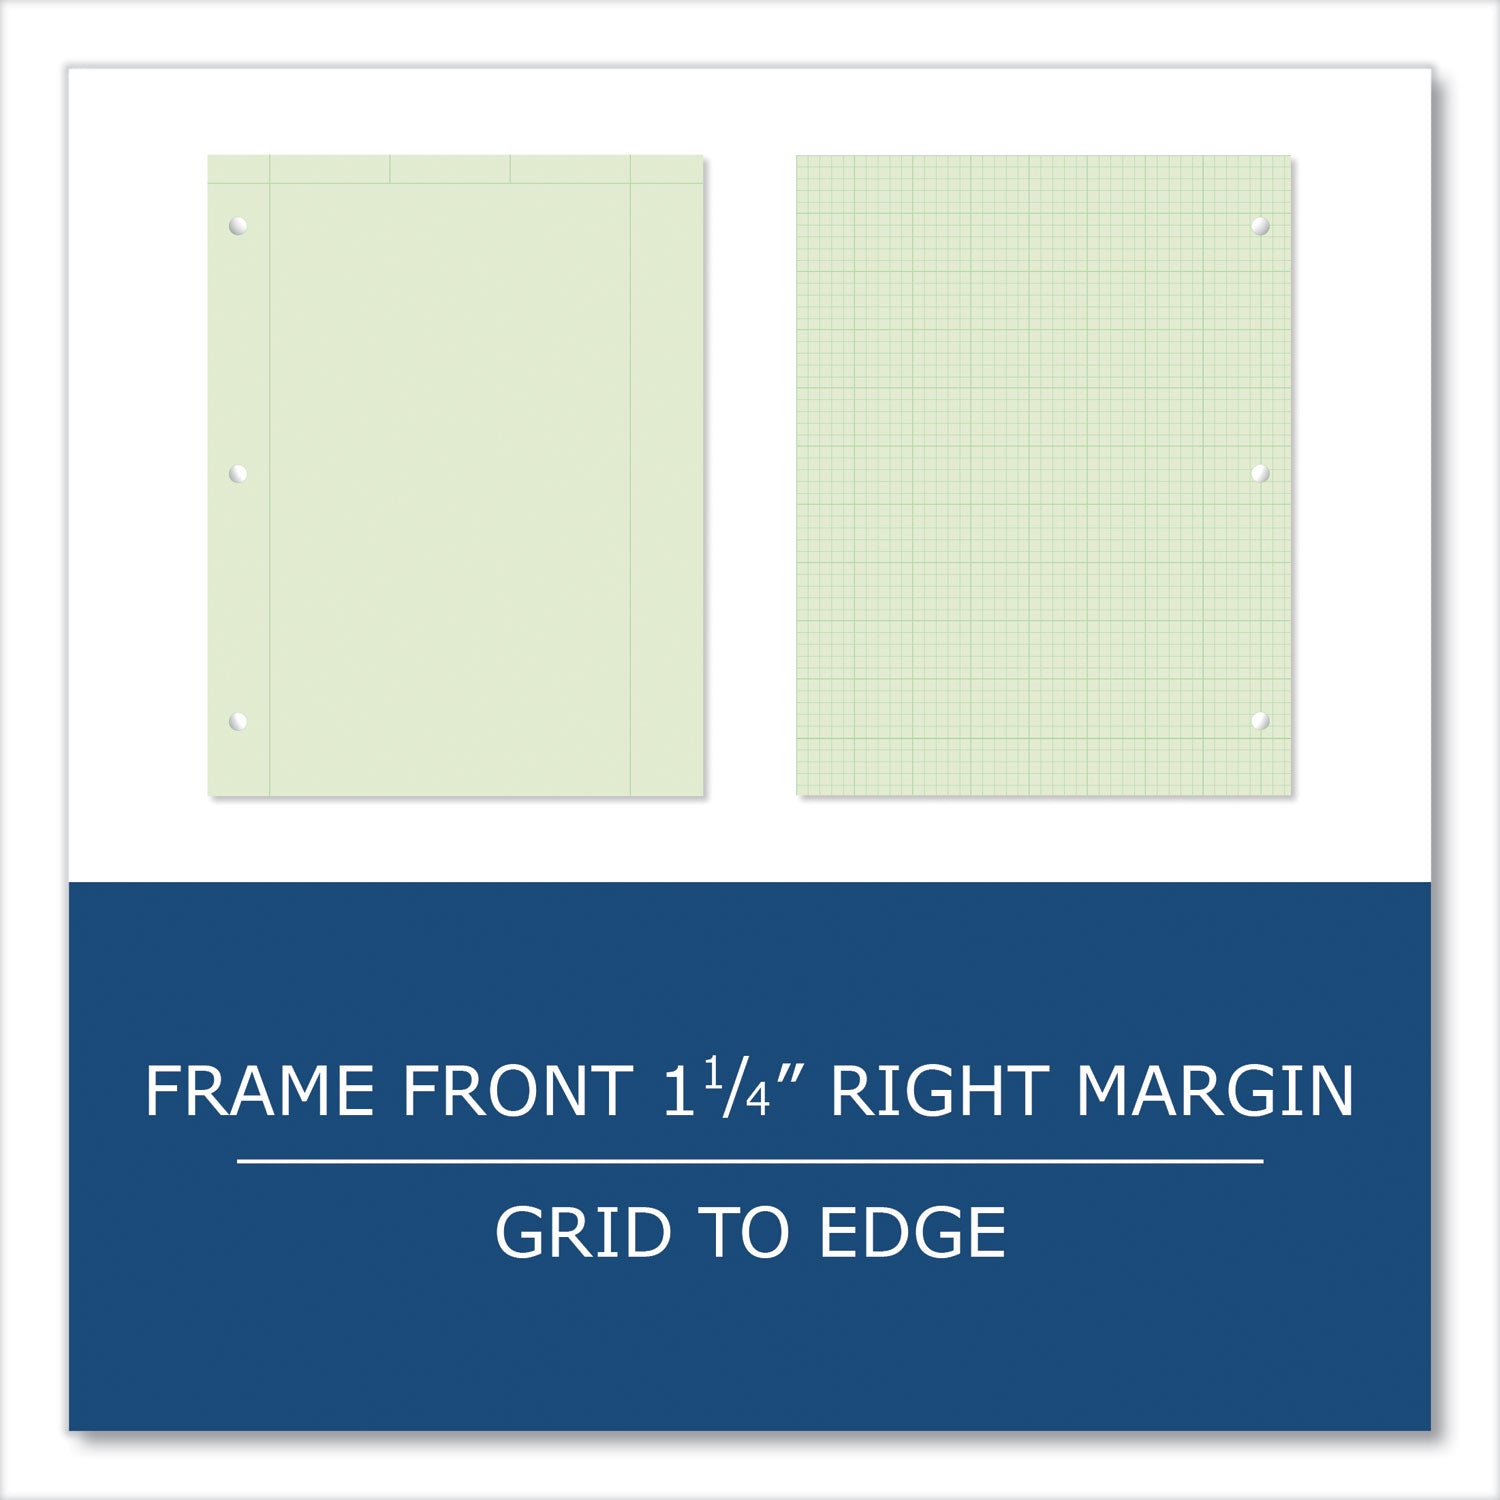 engineer-pad-125-margin-quad-rule-5-sq-in-1-sq-in-100-lt-green-85x11-sheets-pad-24-ct-ships-in-4-6-business-days_roa95582cs - 5